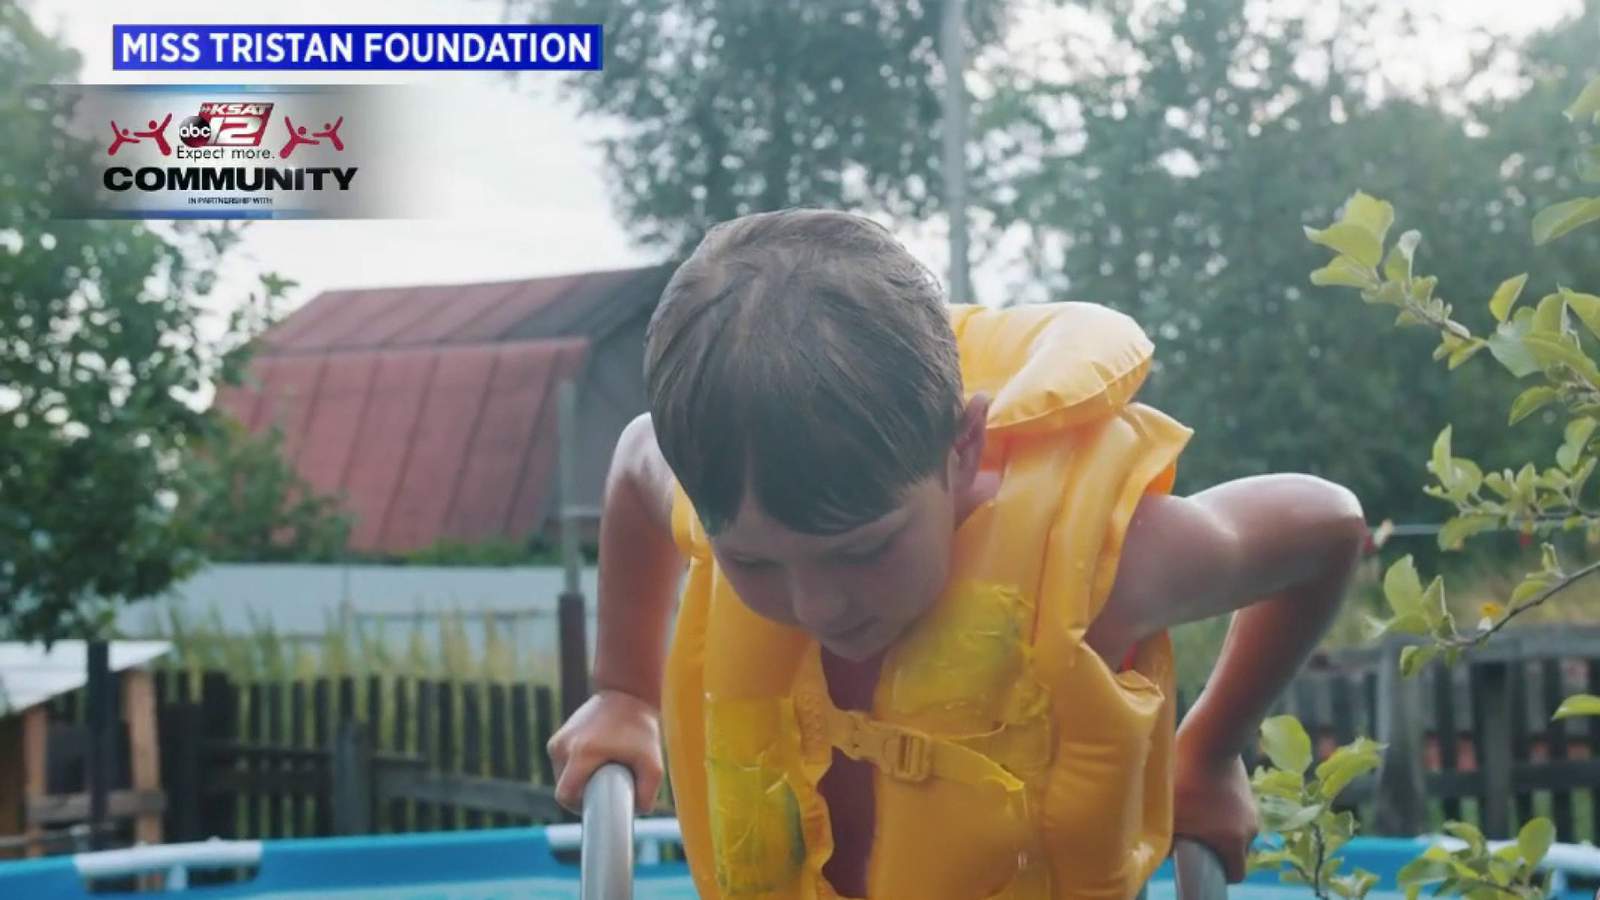 Water safety: Put down your beverage and be within arms reach of your child